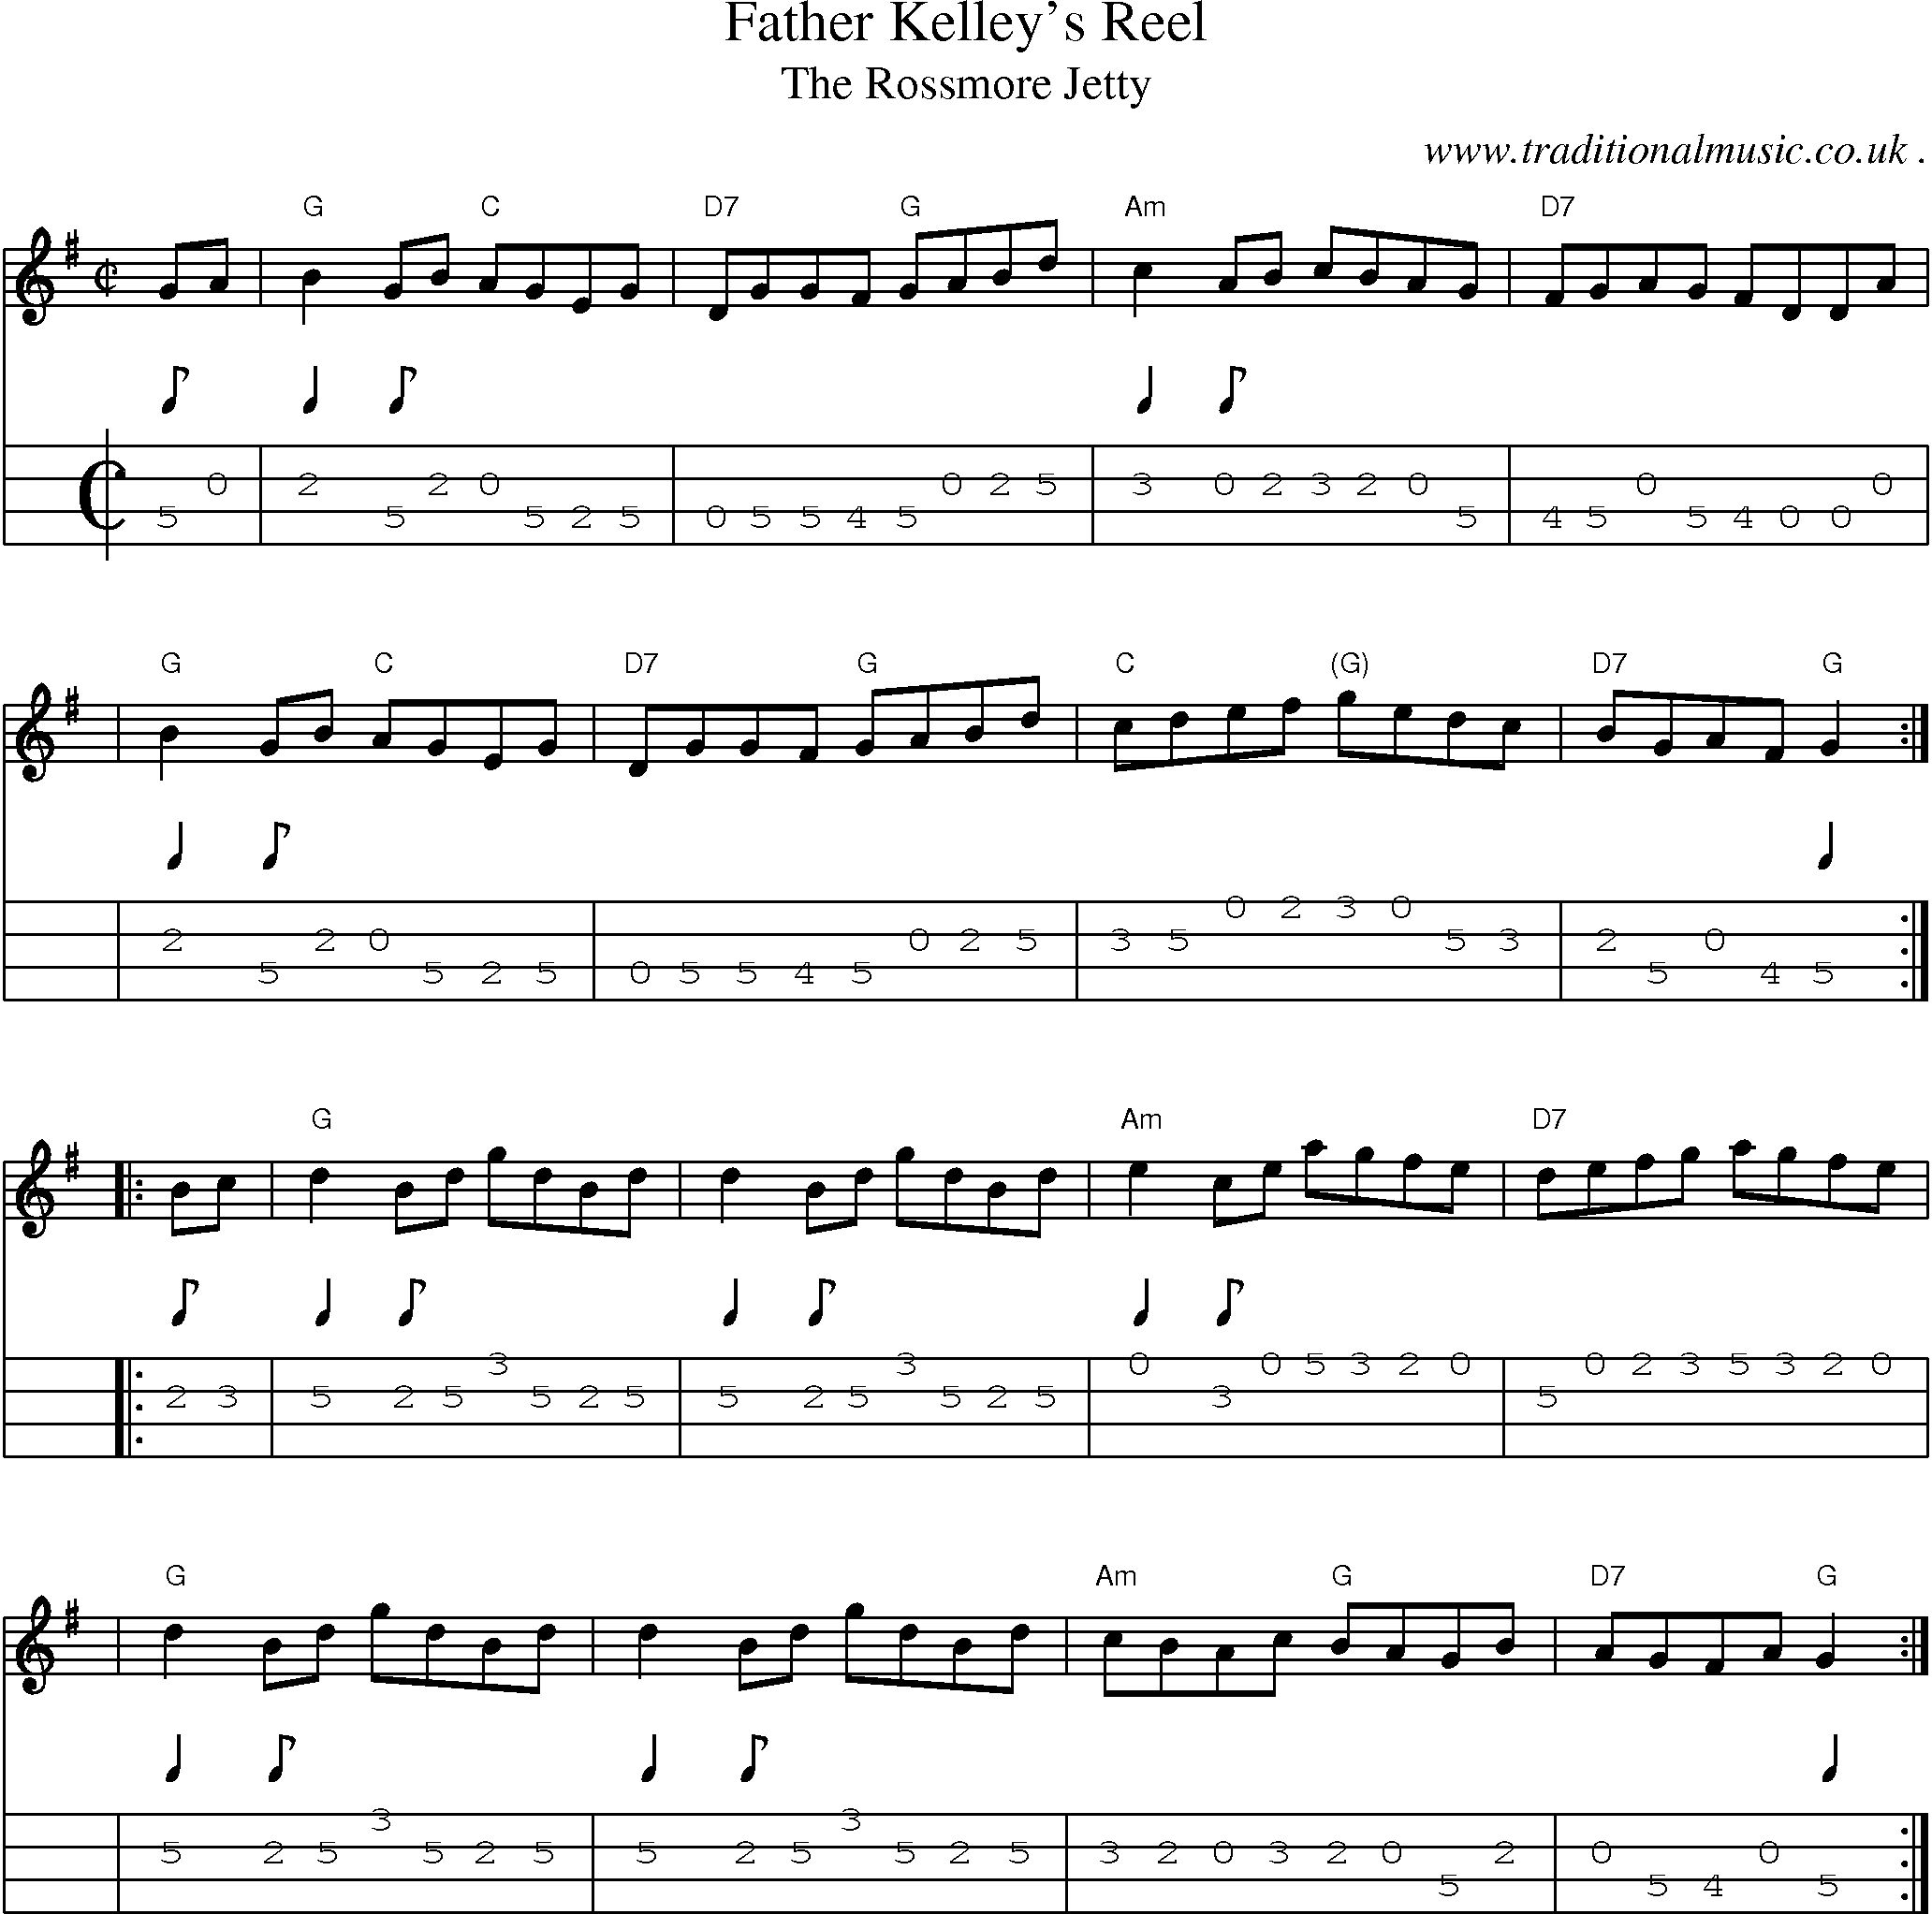 Sheet-music  score, Chords and Mandolin Tabs for Father Kelleys Reel